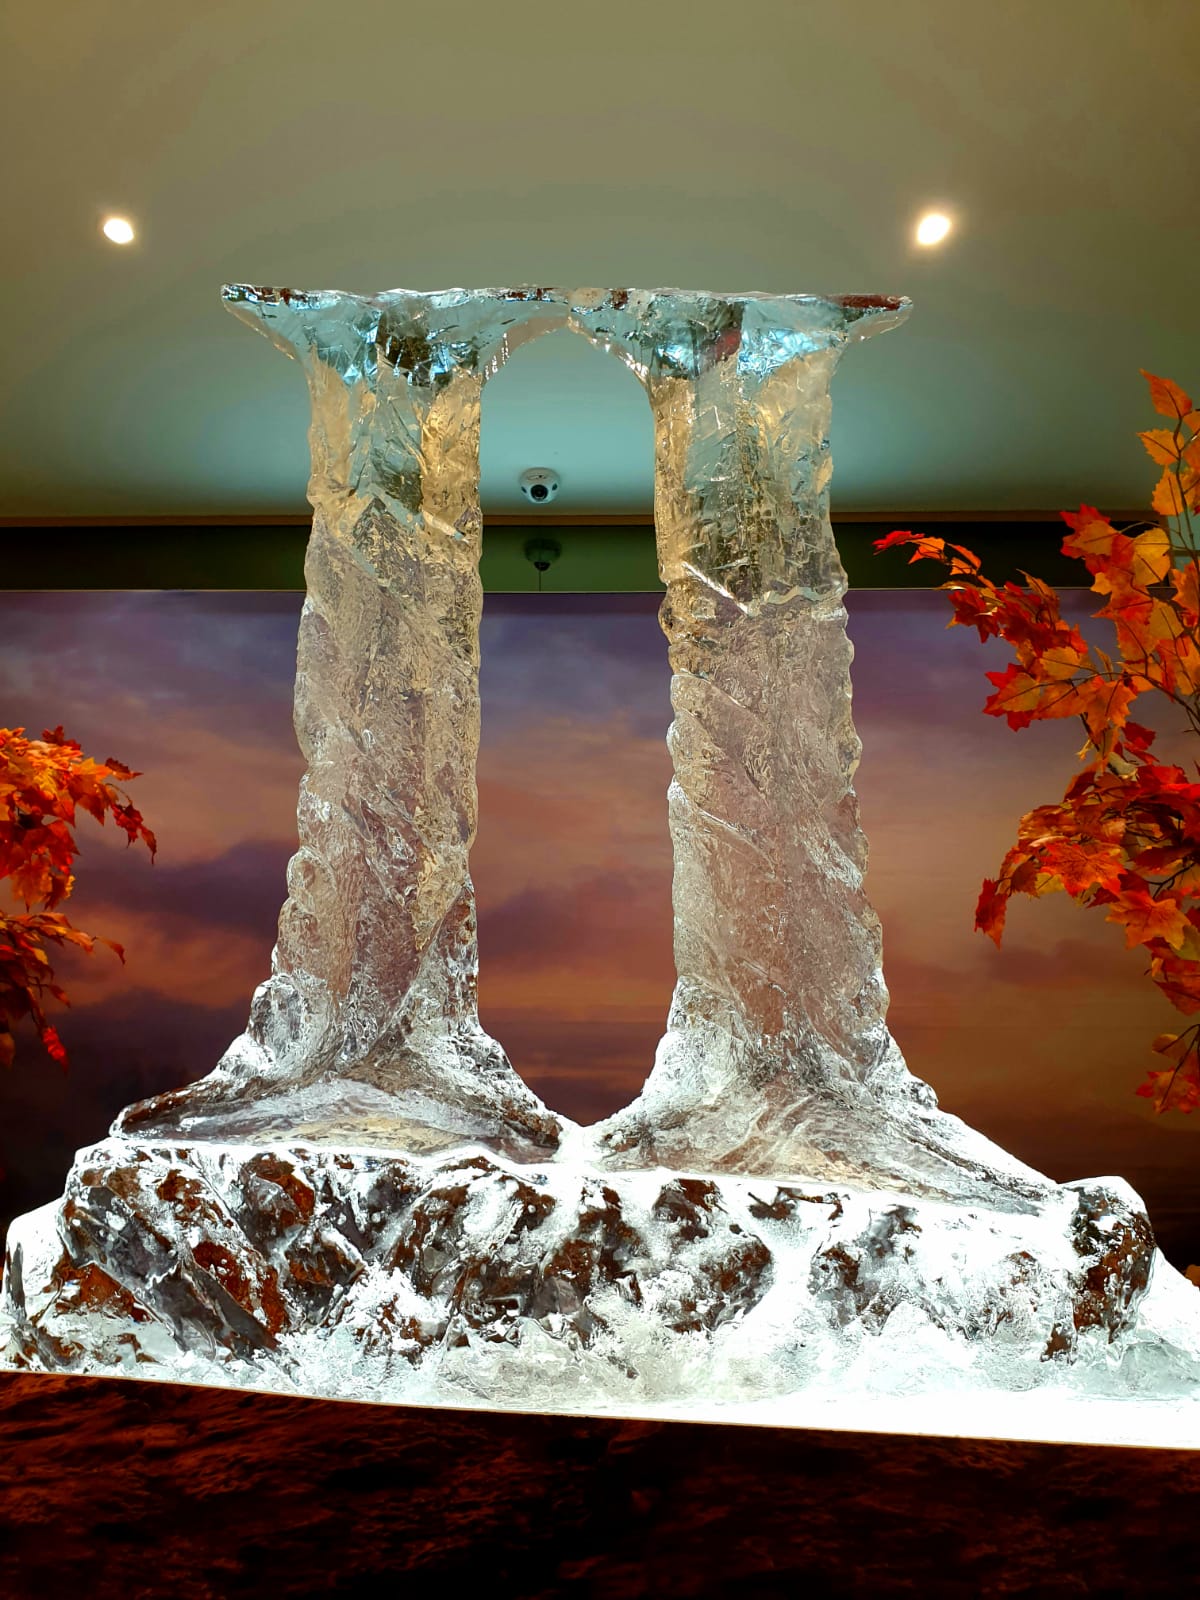 Ice Bars & Luges by Premier Ice Sculptures